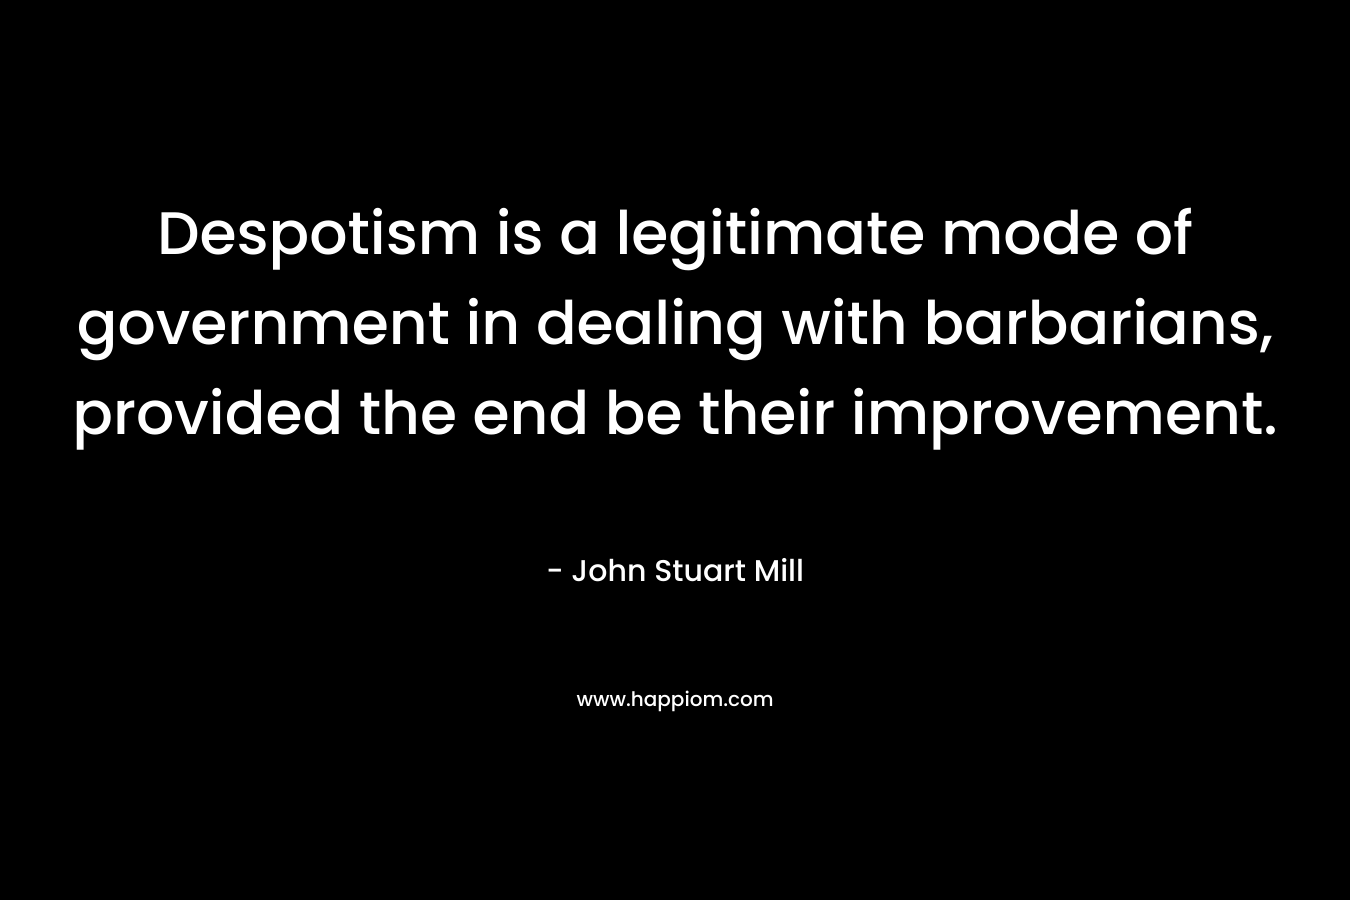 Despotism is a legitimate mode of government in dealing with barbarians, provided the end be their improvement. – John Stuart Mill